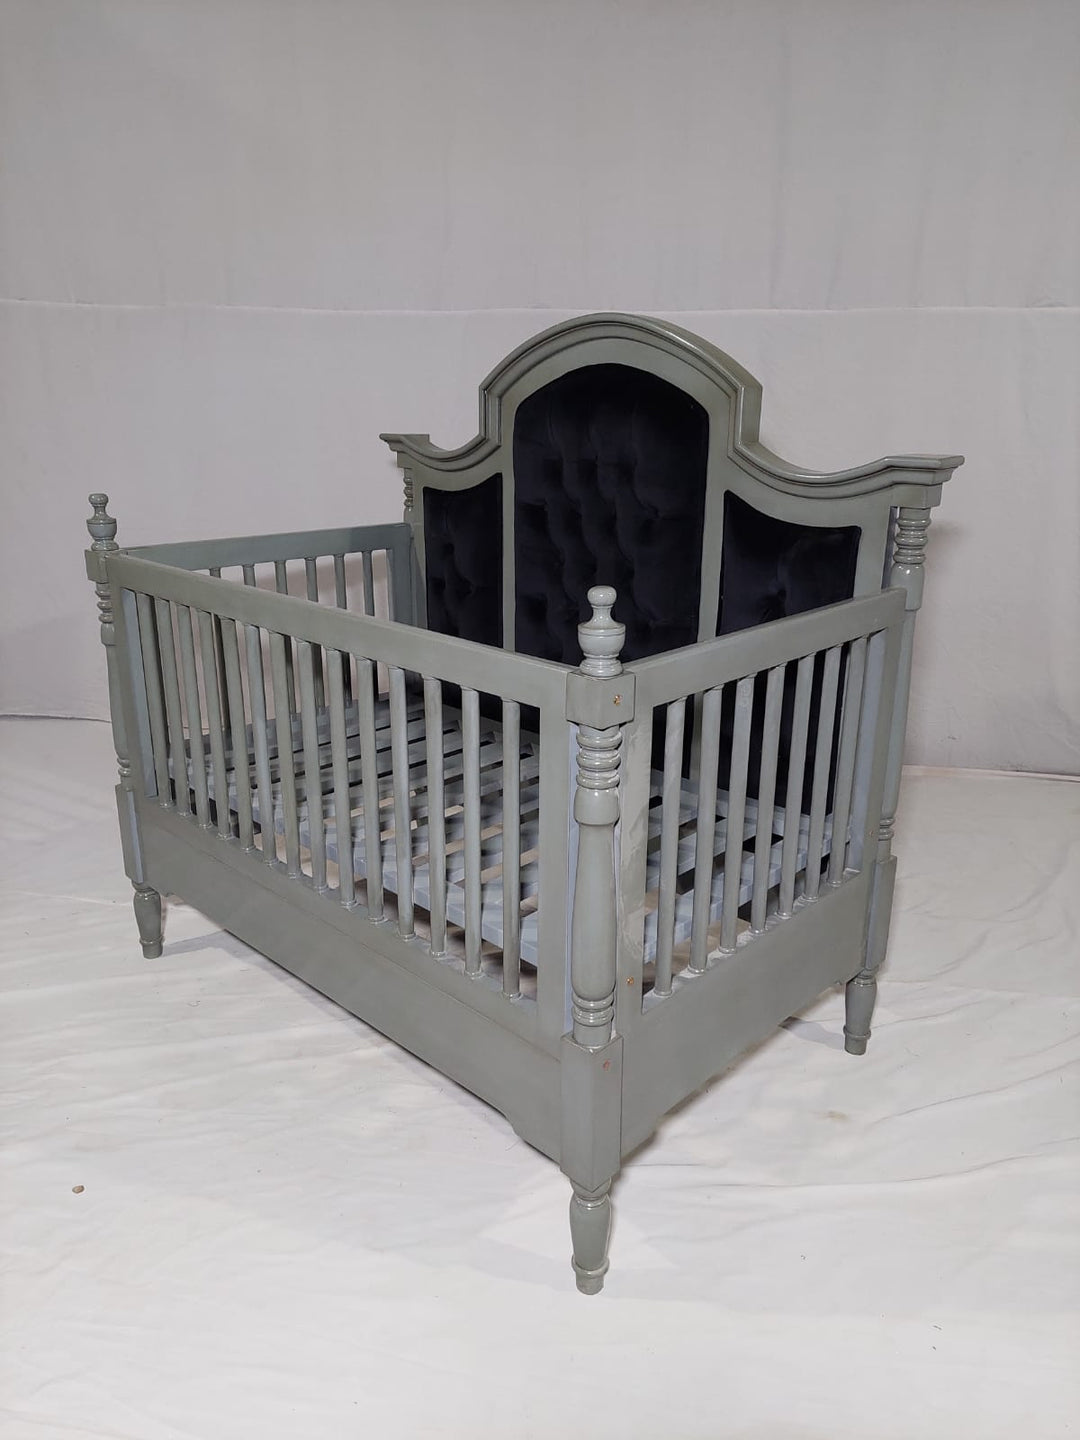 The Charcoal Elegance Grand Baby Cot